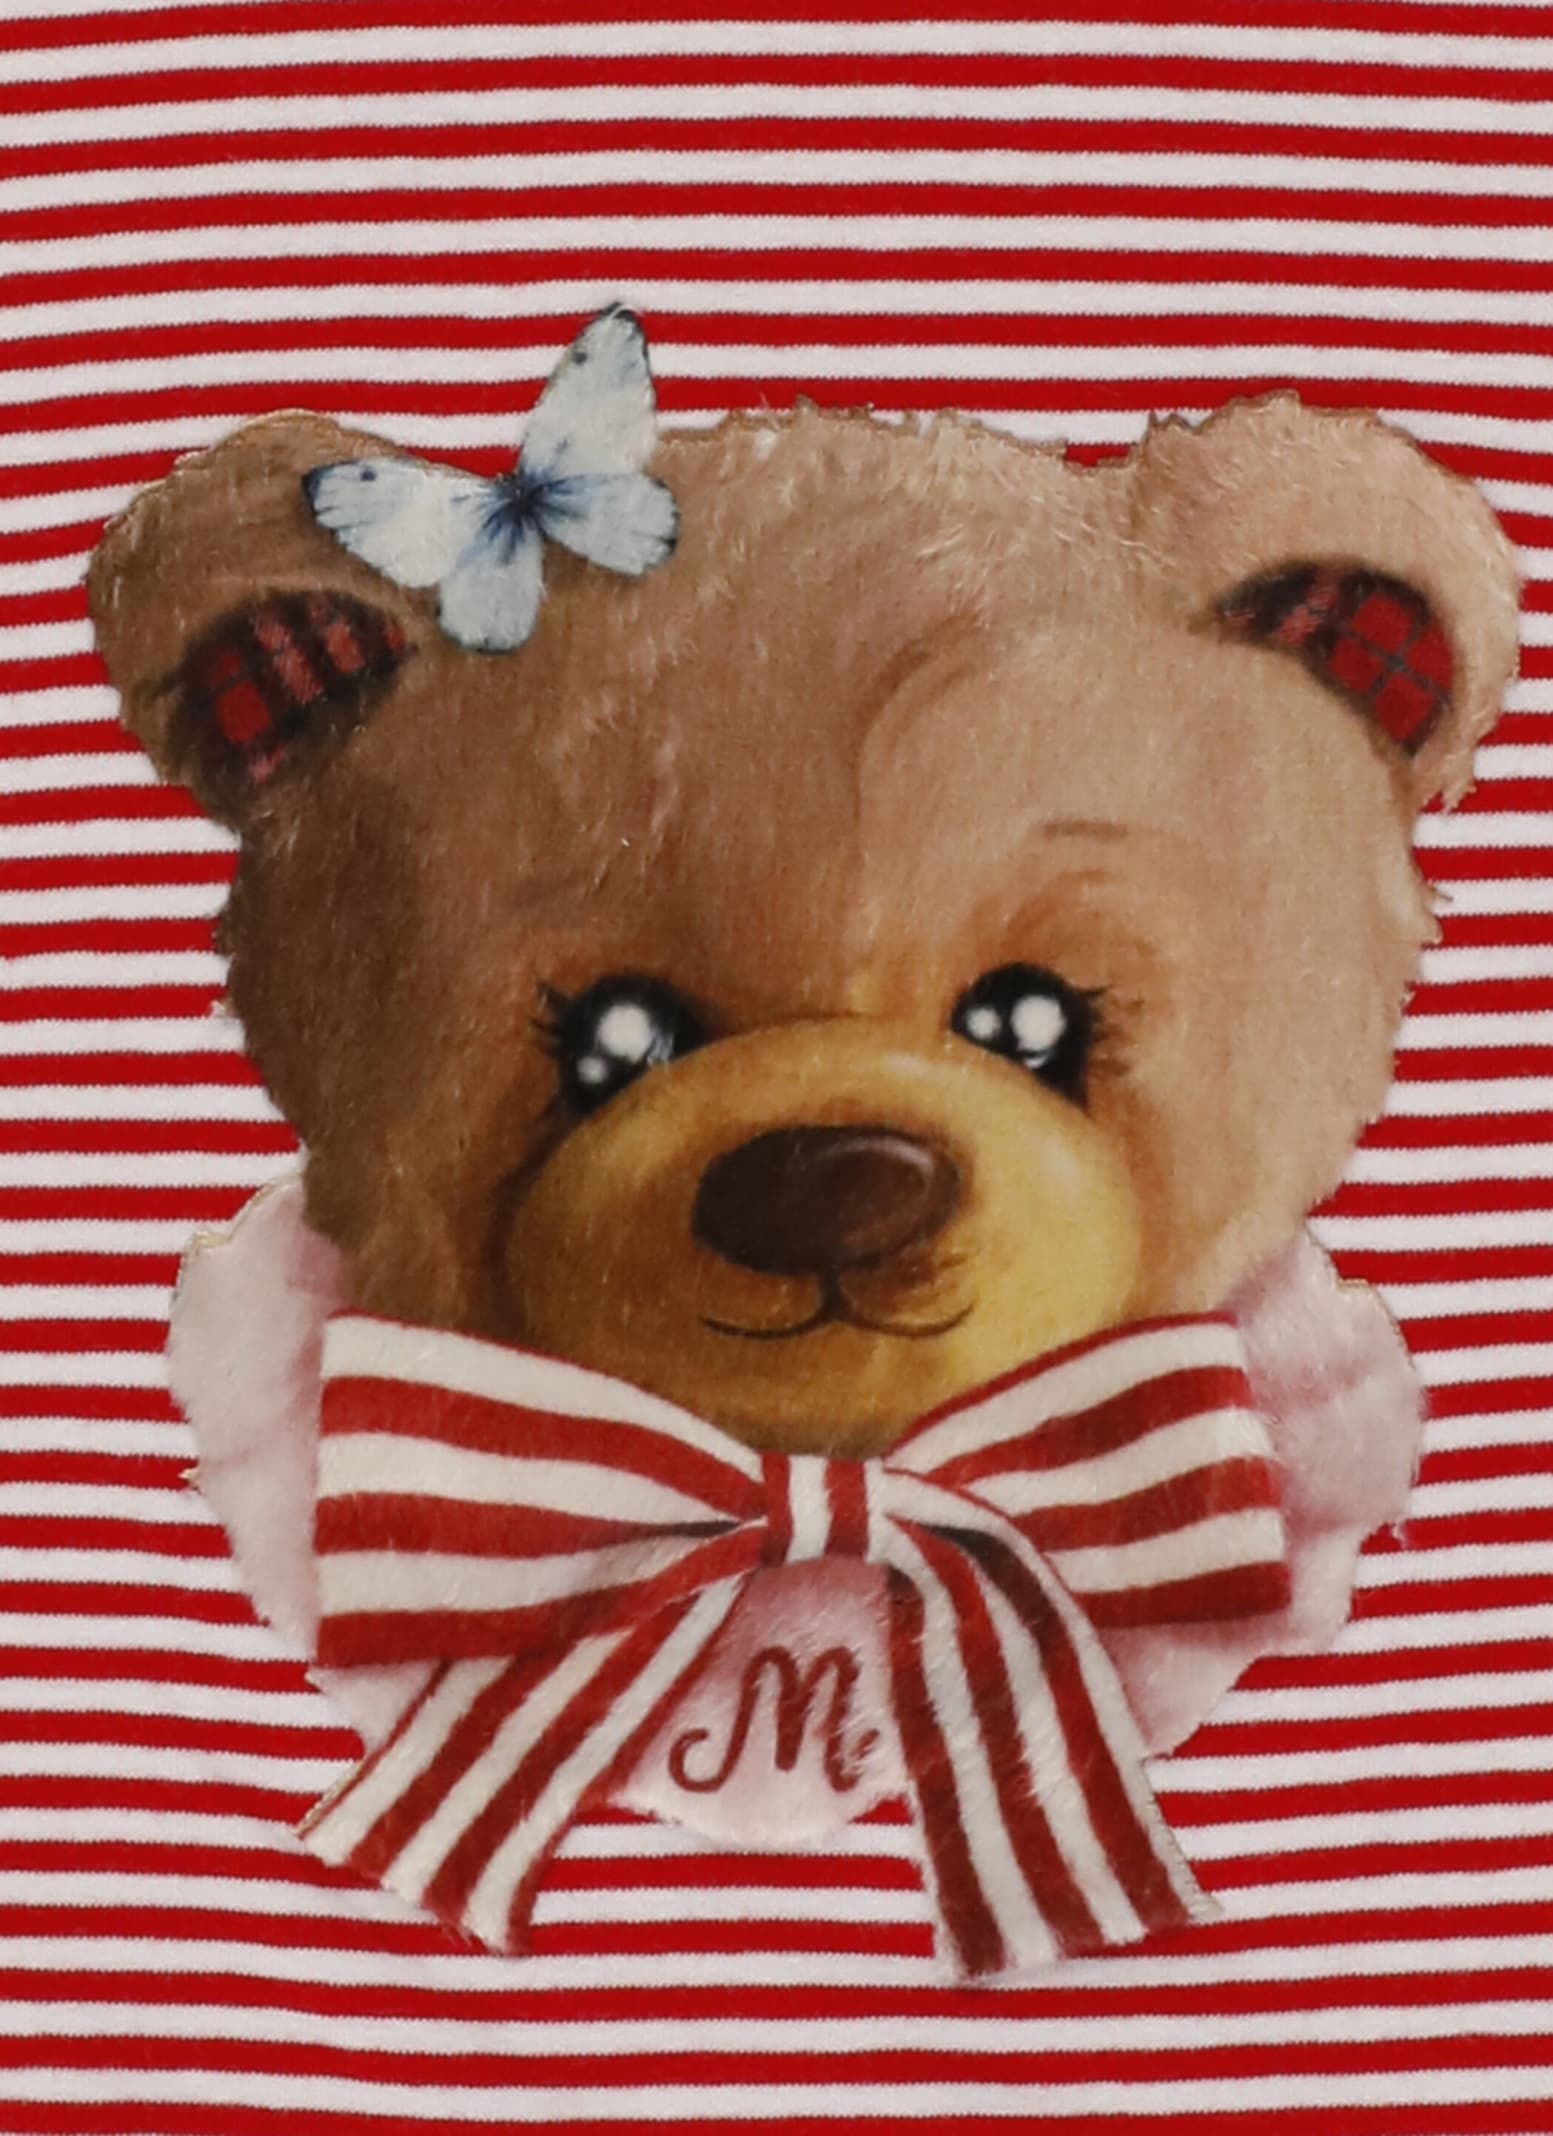 Shop Monnalisa Striped Sweater With Teddy Bear In Righe Picco